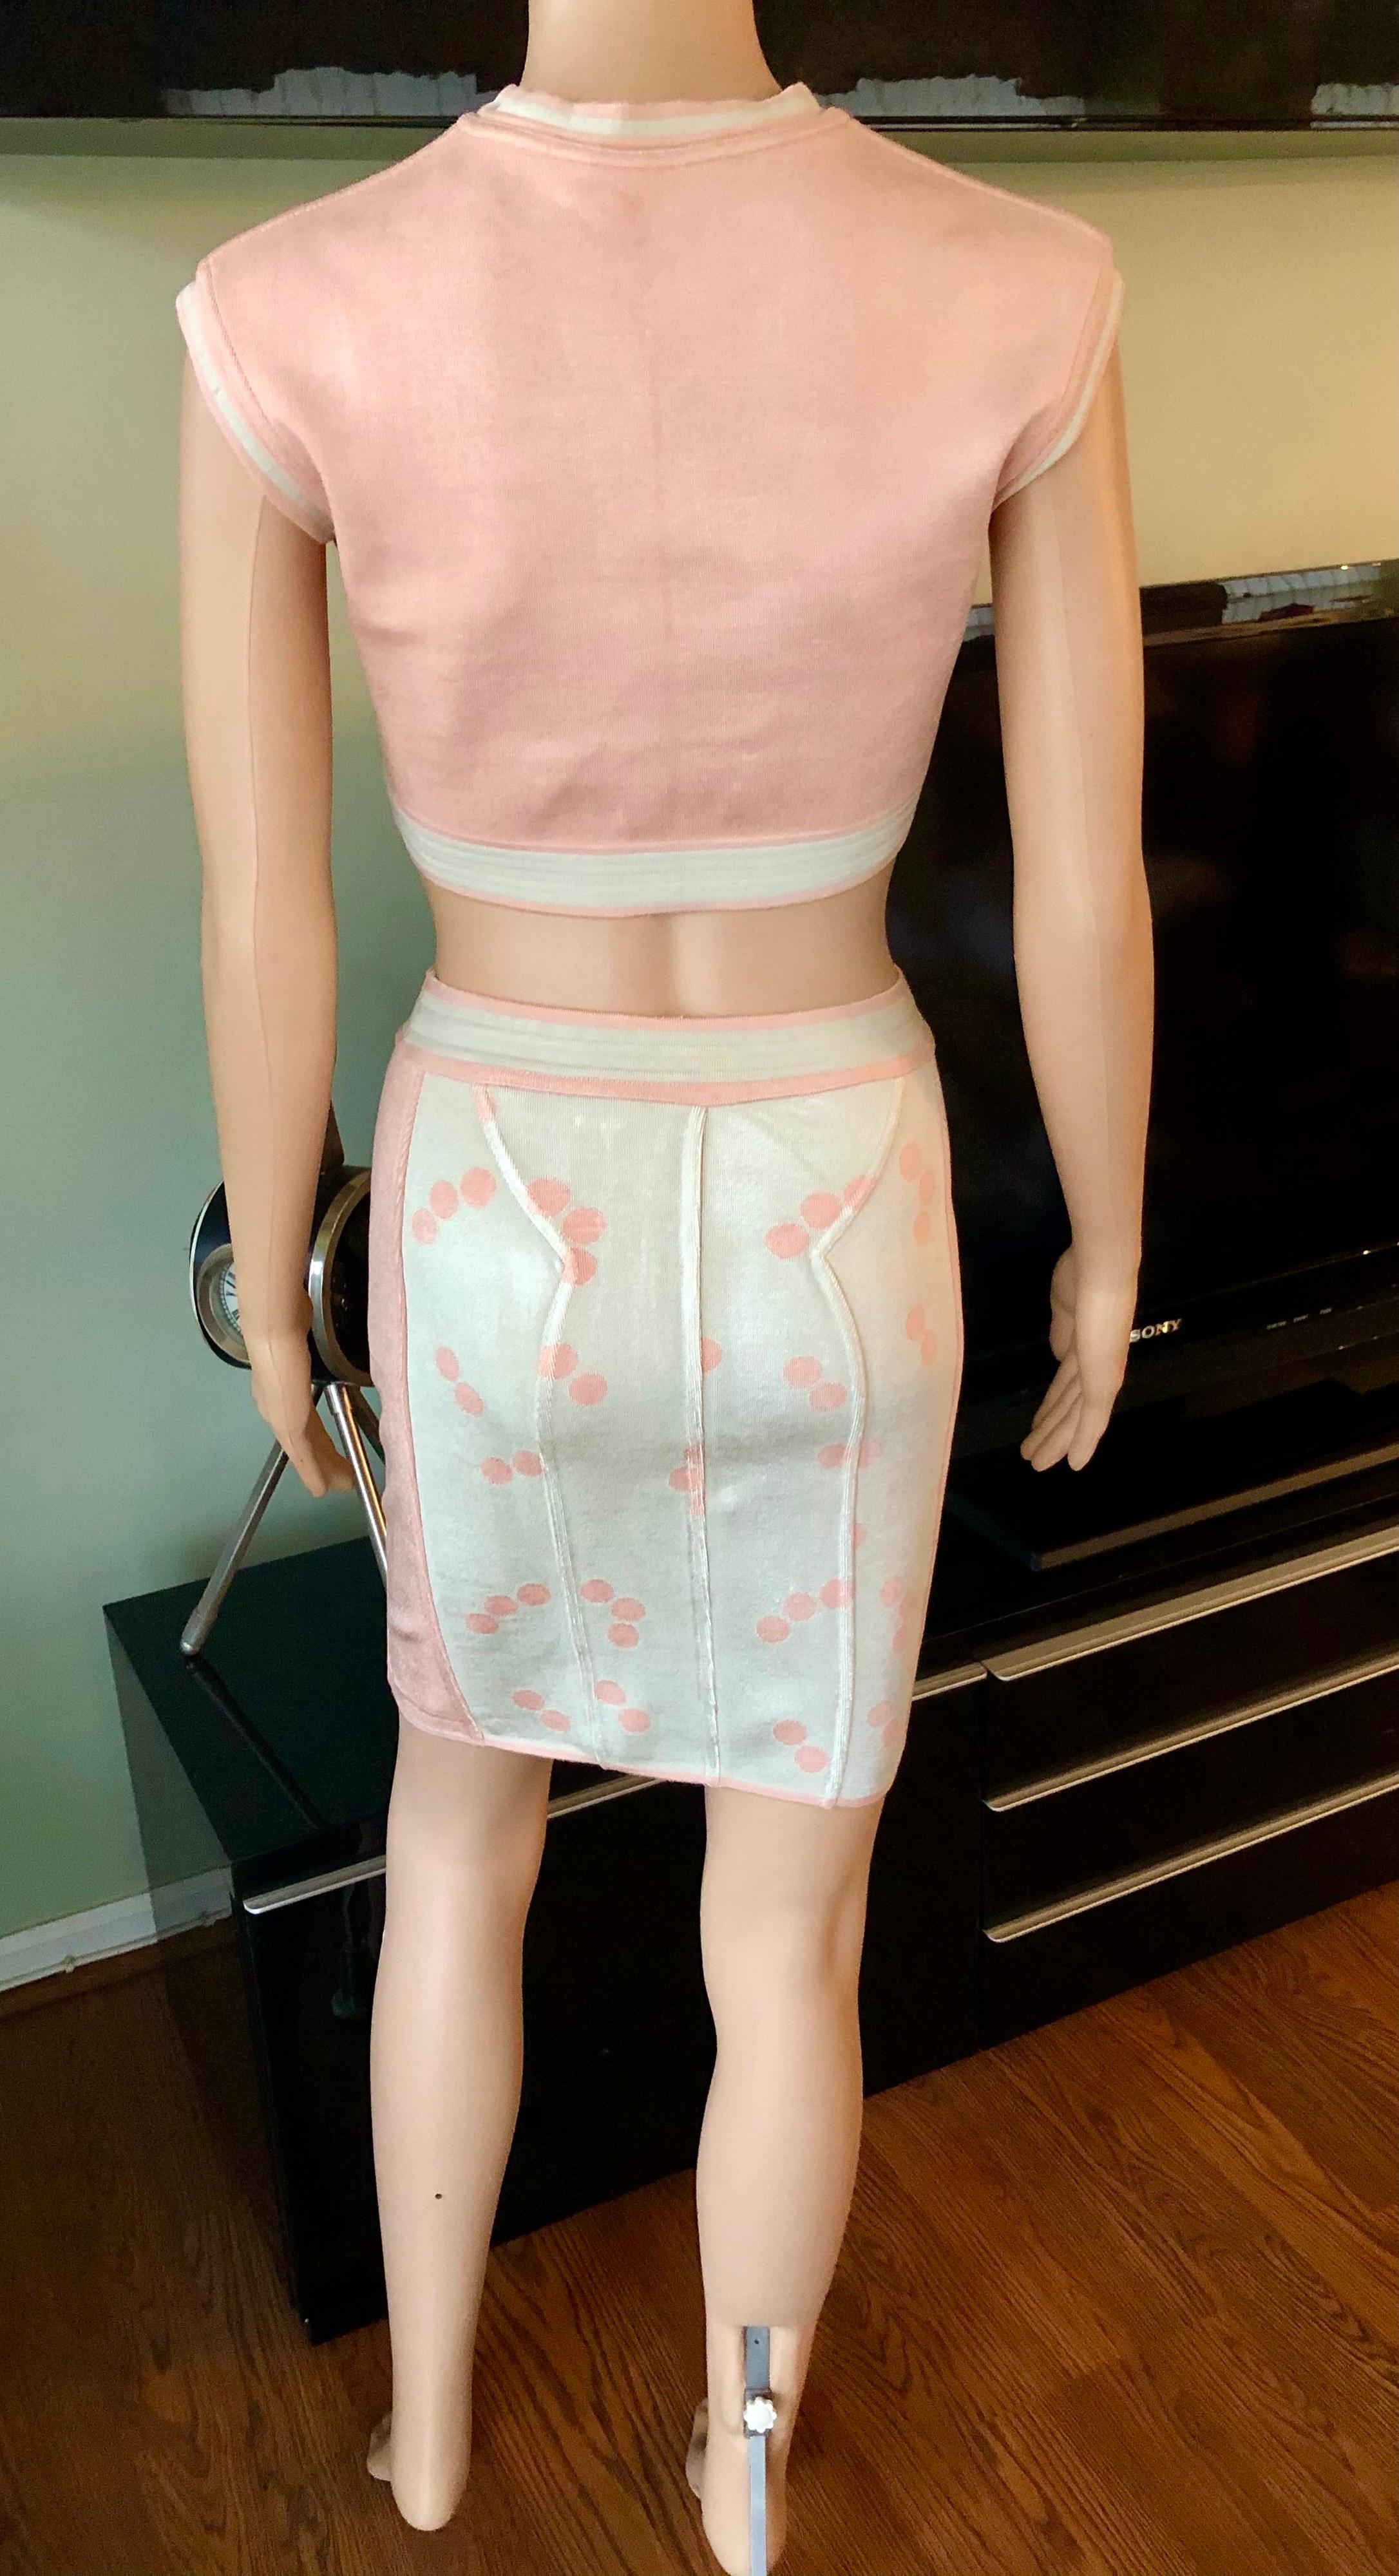 Women's Azzedine Alaia S/S 1991 Vintage Skirt and Crop Top 2 Piece Set  For Sale